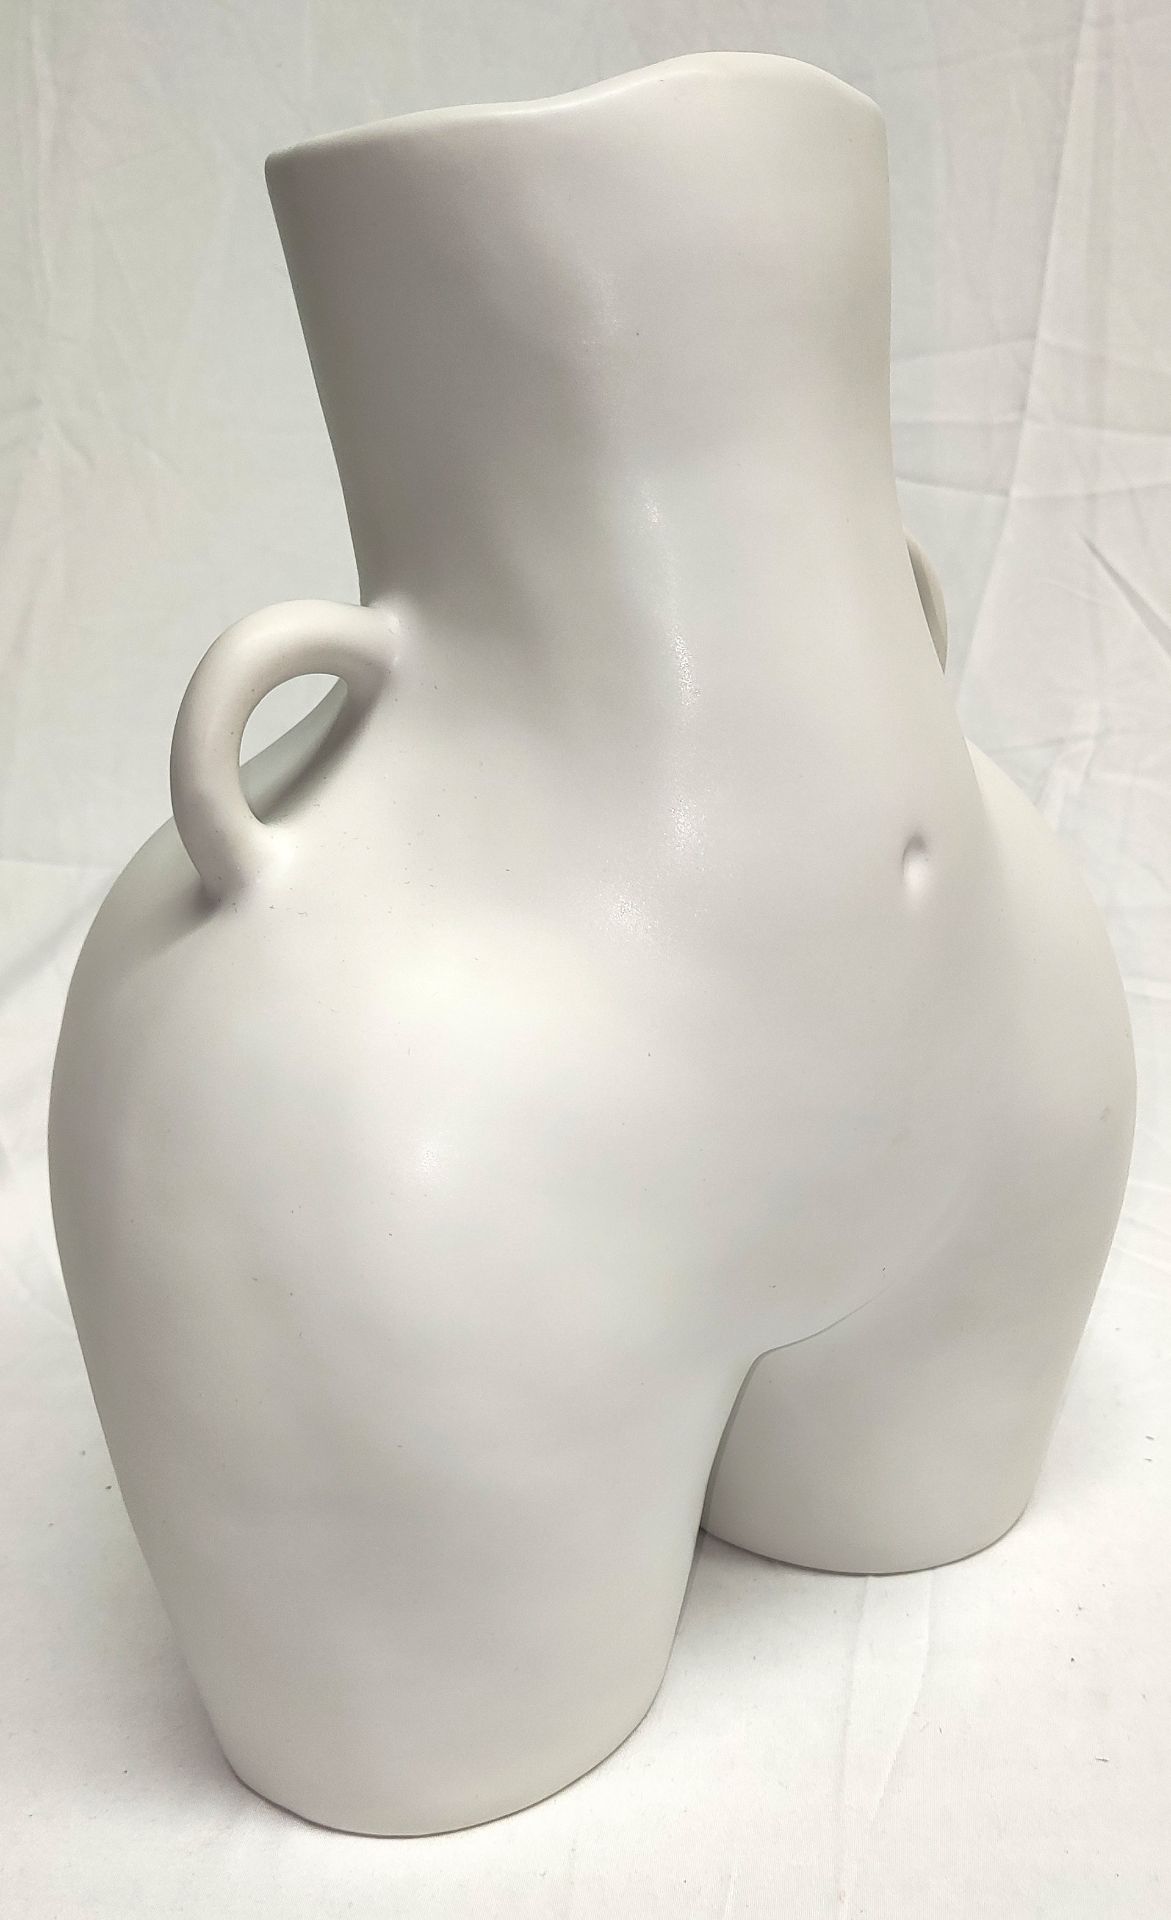 1 x ANISSA KERMICHE Love Handles Vase In White - Boxed - Original RRP £340 - Ref: 6787060/HJL382/ - Image 3 of 16